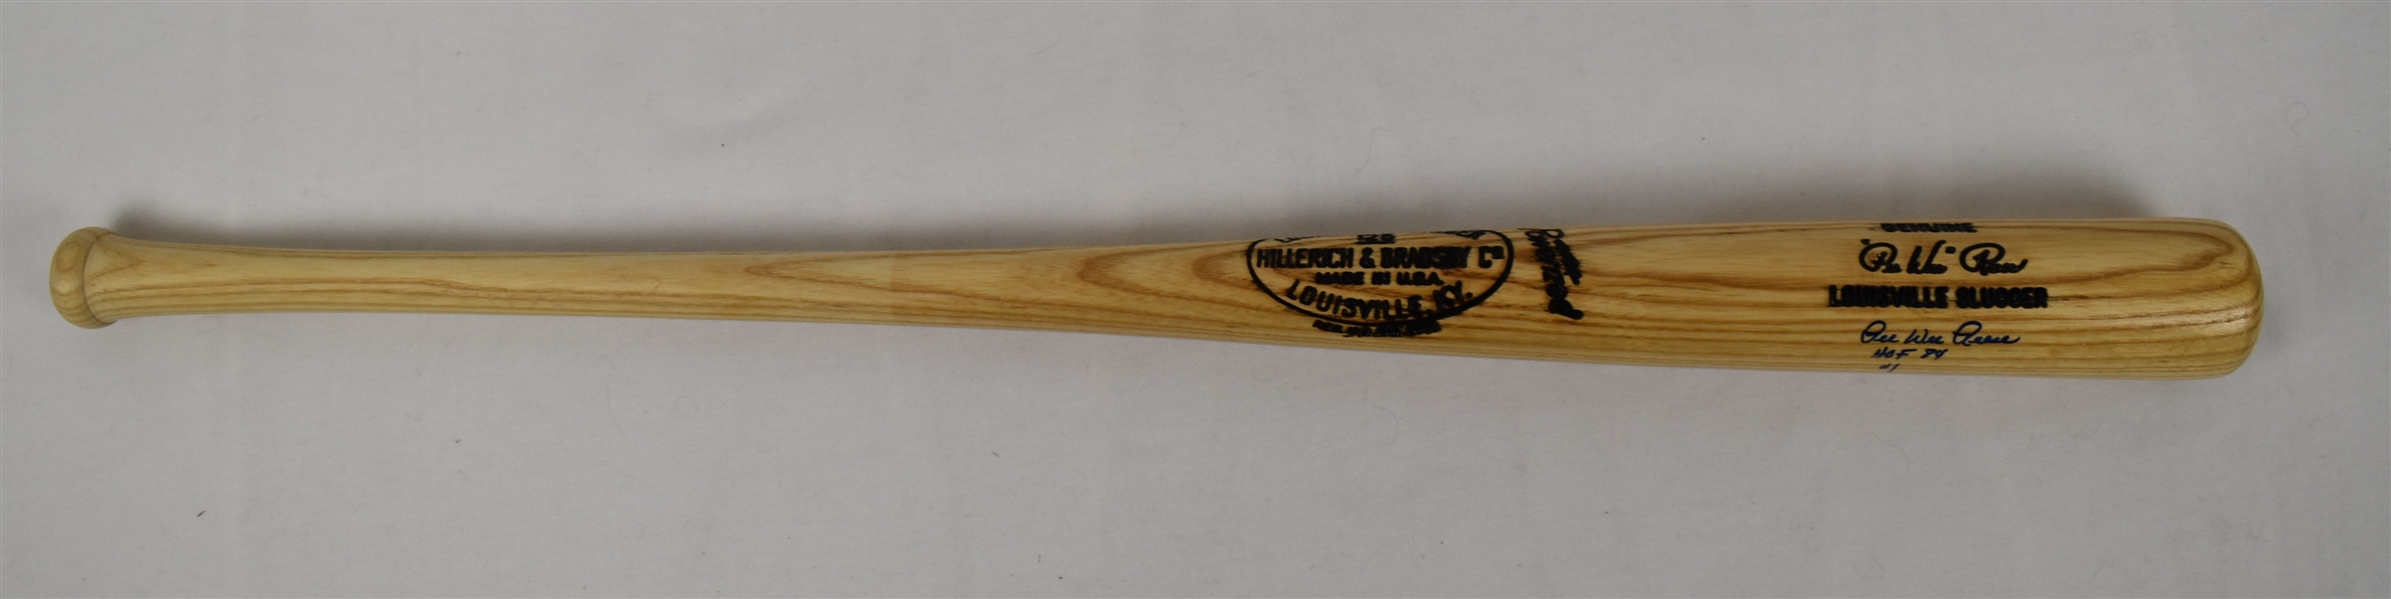 Pee Wee Reese Autographed & Inscribed Bat